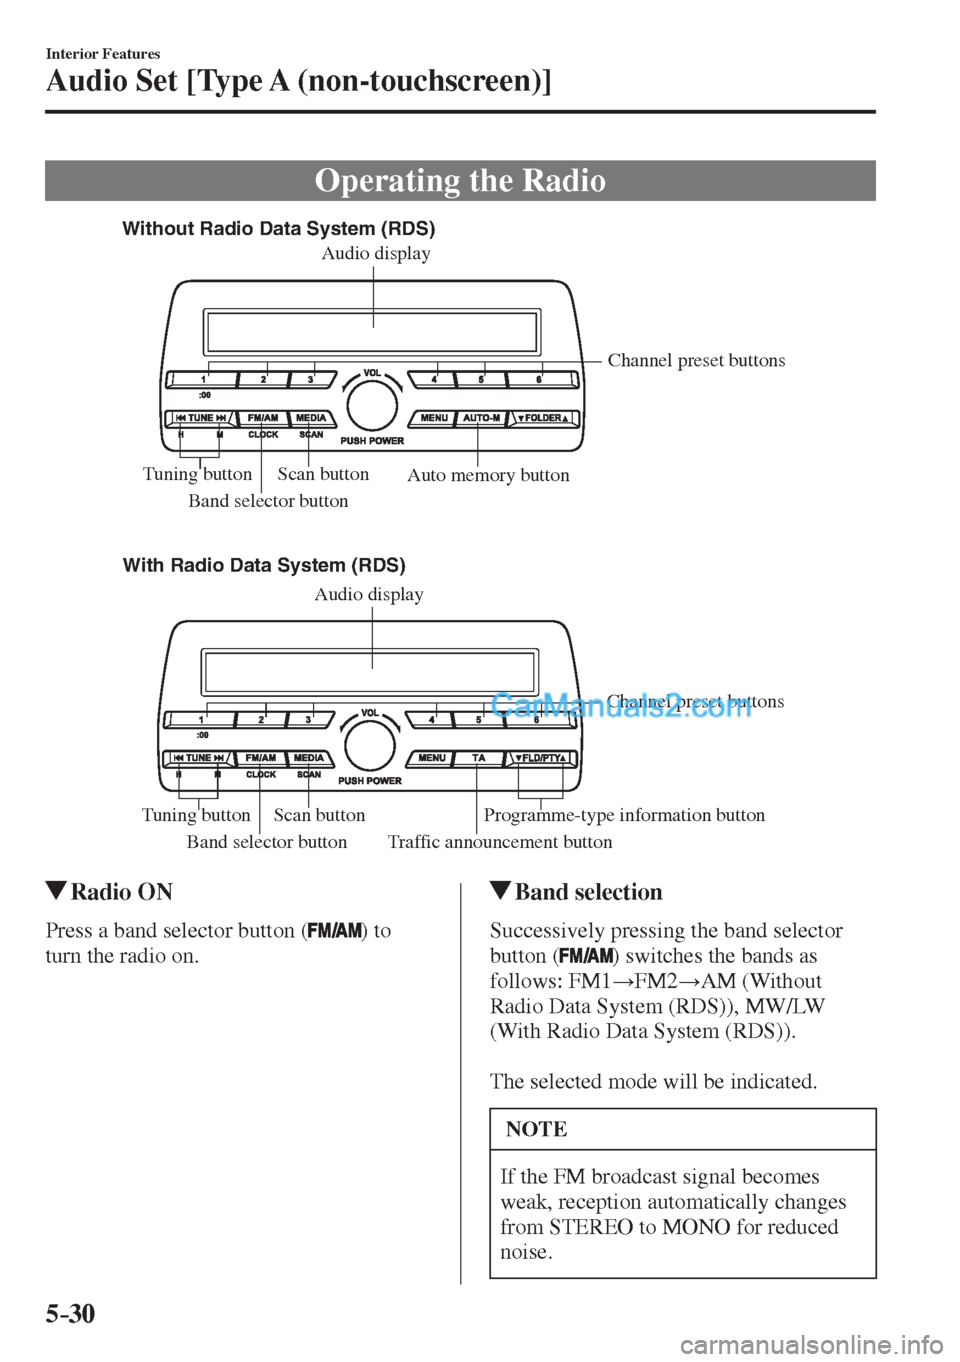 MAZDA MODEL 2 2017  Owners Manual (in English) 5–30
Interior Features
Audio Set [Type A (non-touchscreen)]
 Operating the Radio
             
Without Radio Data System (RDS)
With Radio Data System (RDS)
Band selector button Traffic announcement 